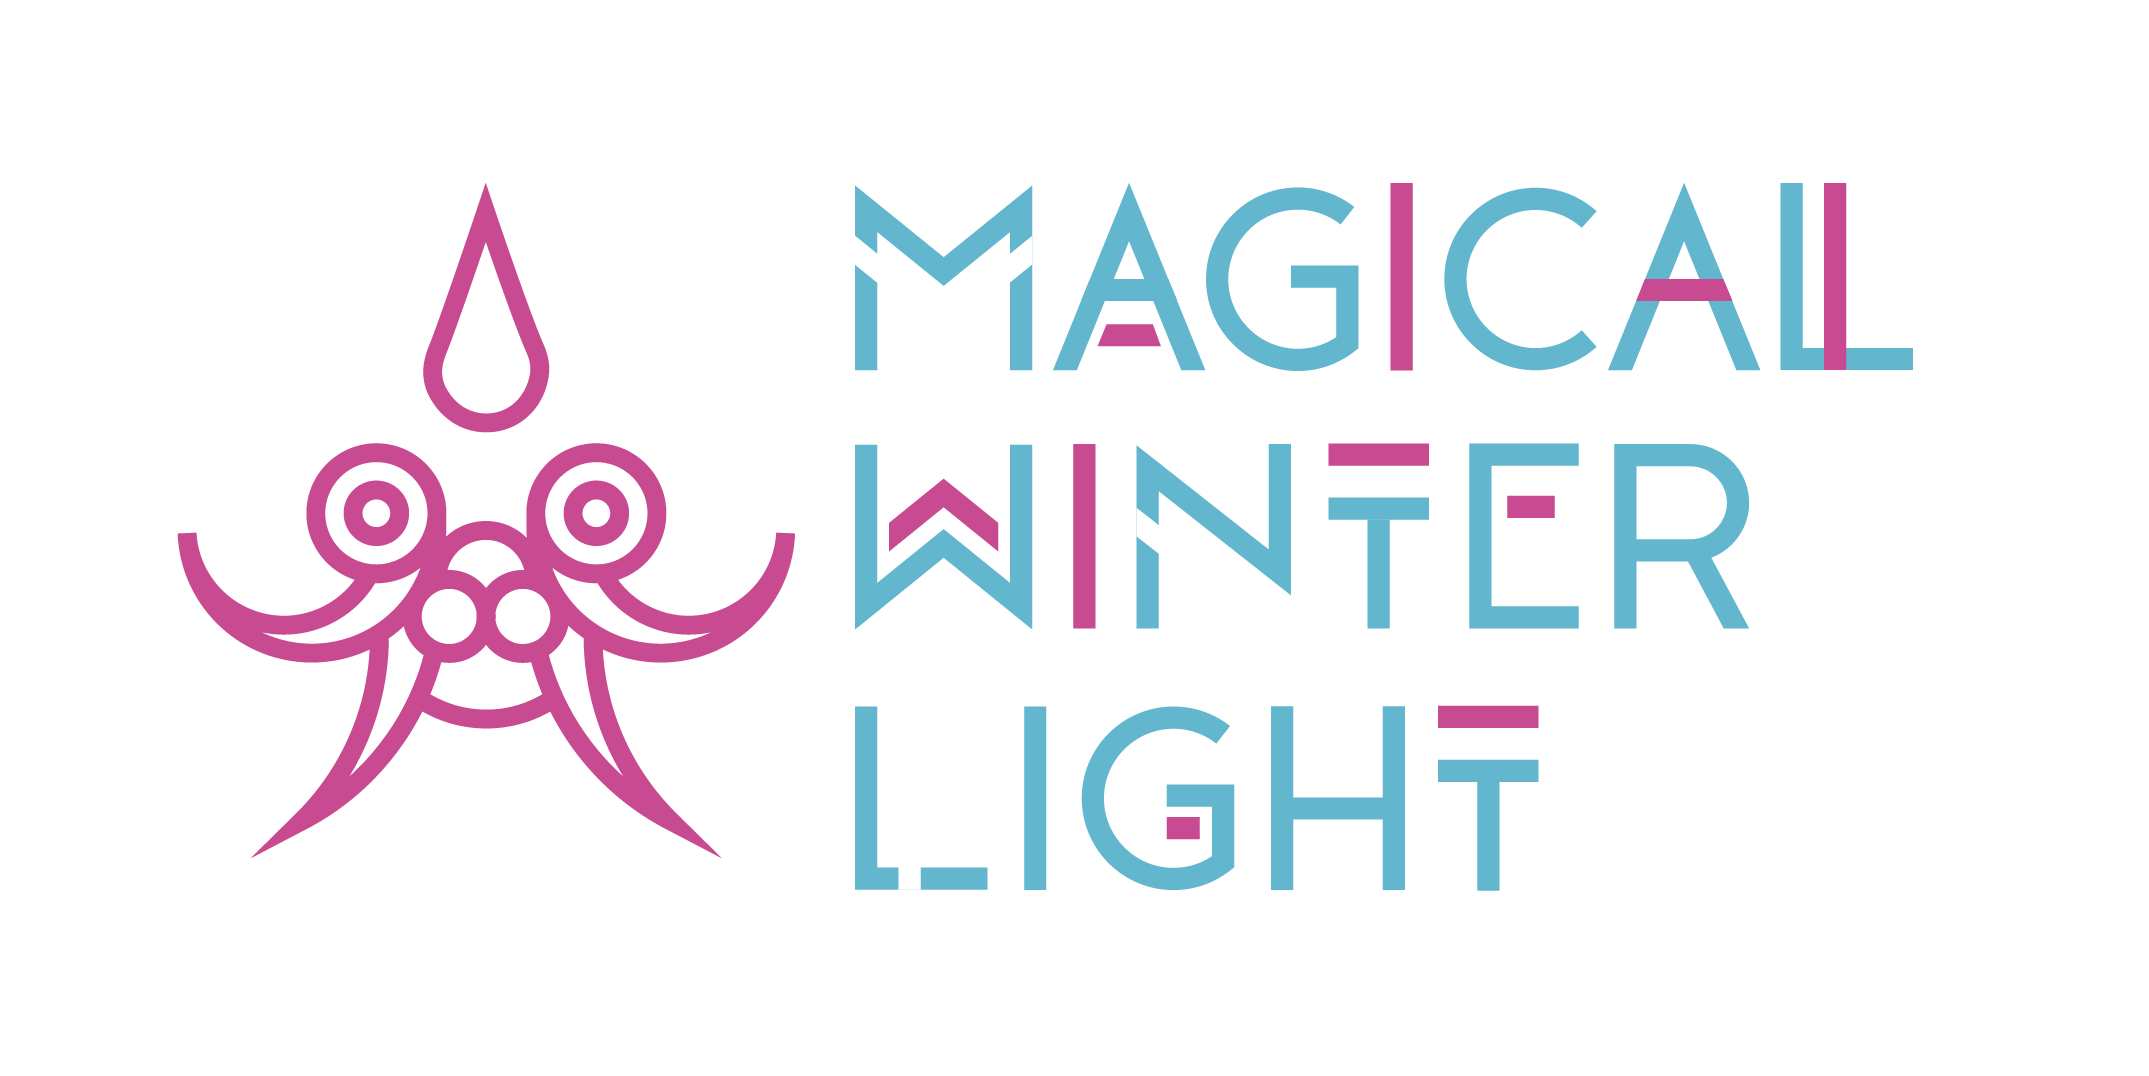 Magical Winter Lights Festival logo for their truckside Advertising campaign in Houston, Tx..